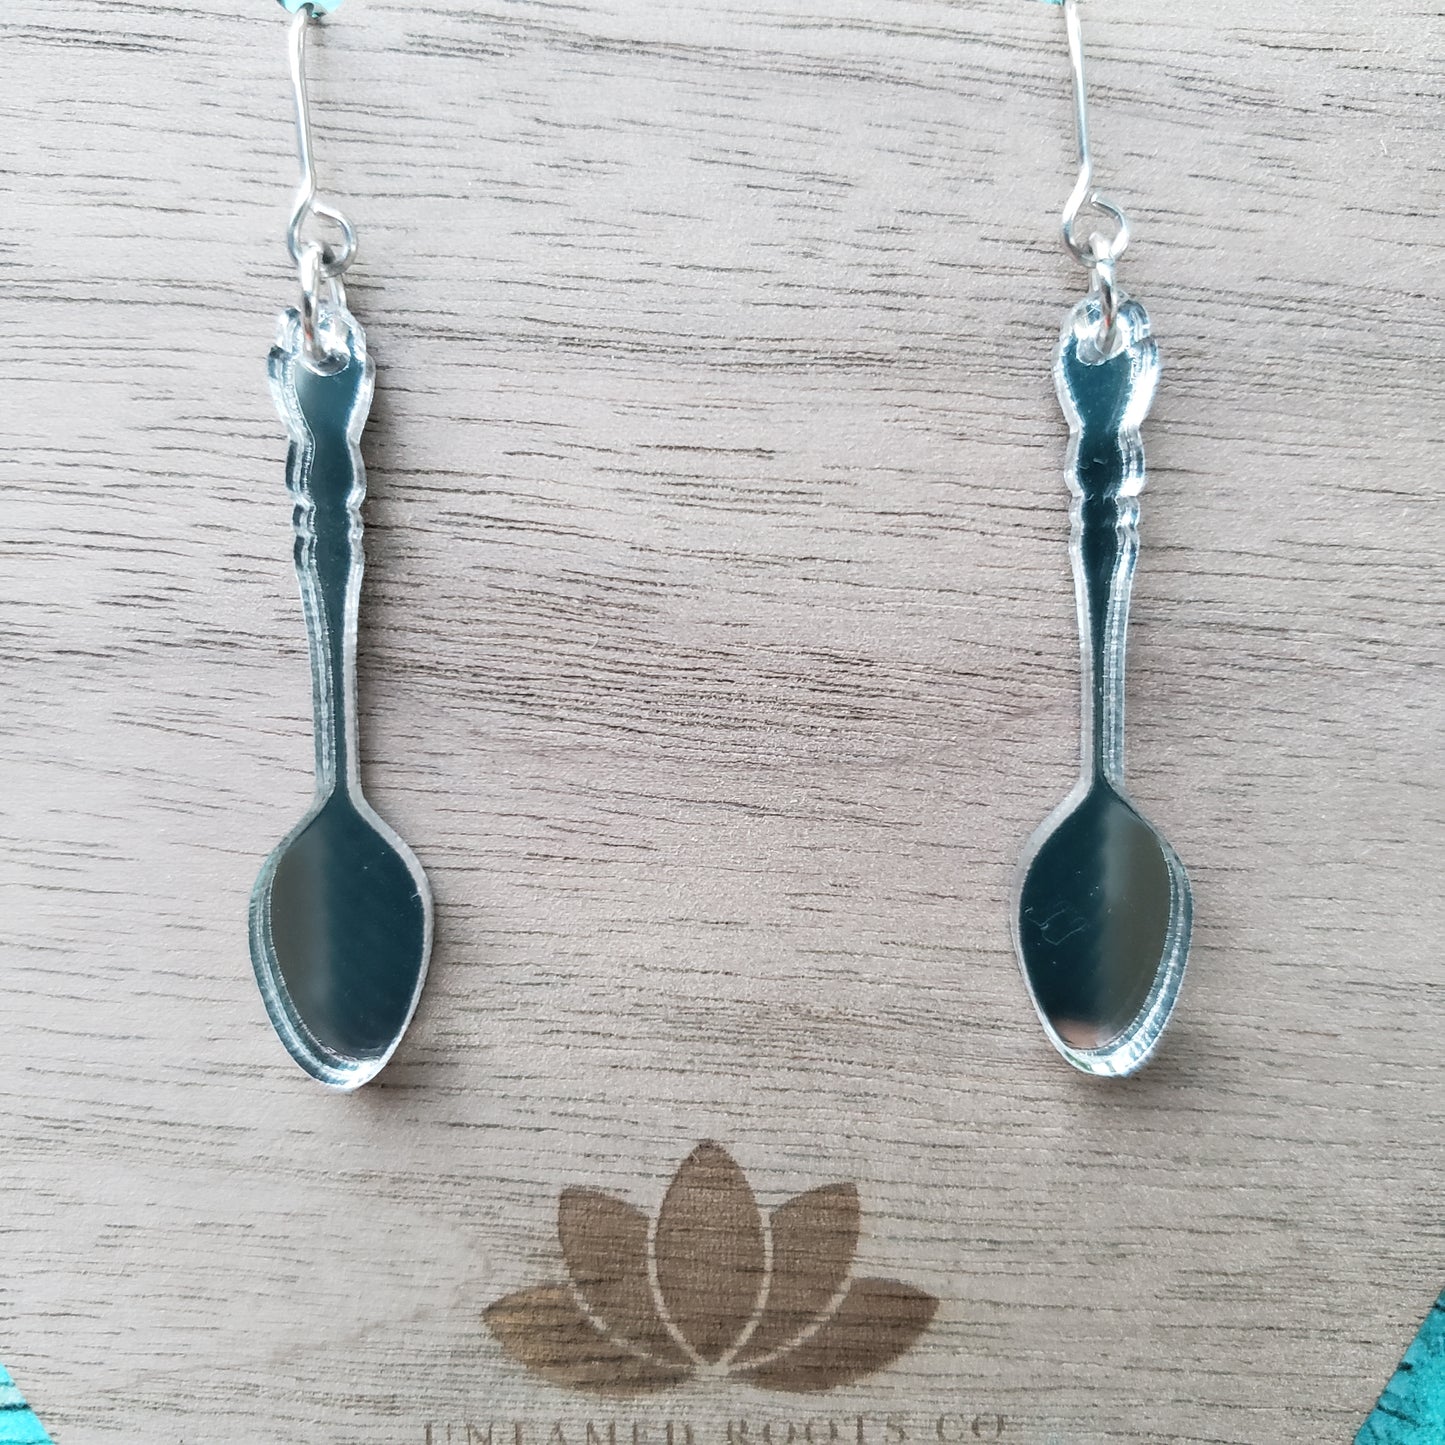 Close up image of silver mirror spoon shaped dangle earrings on stainless steel earring wires